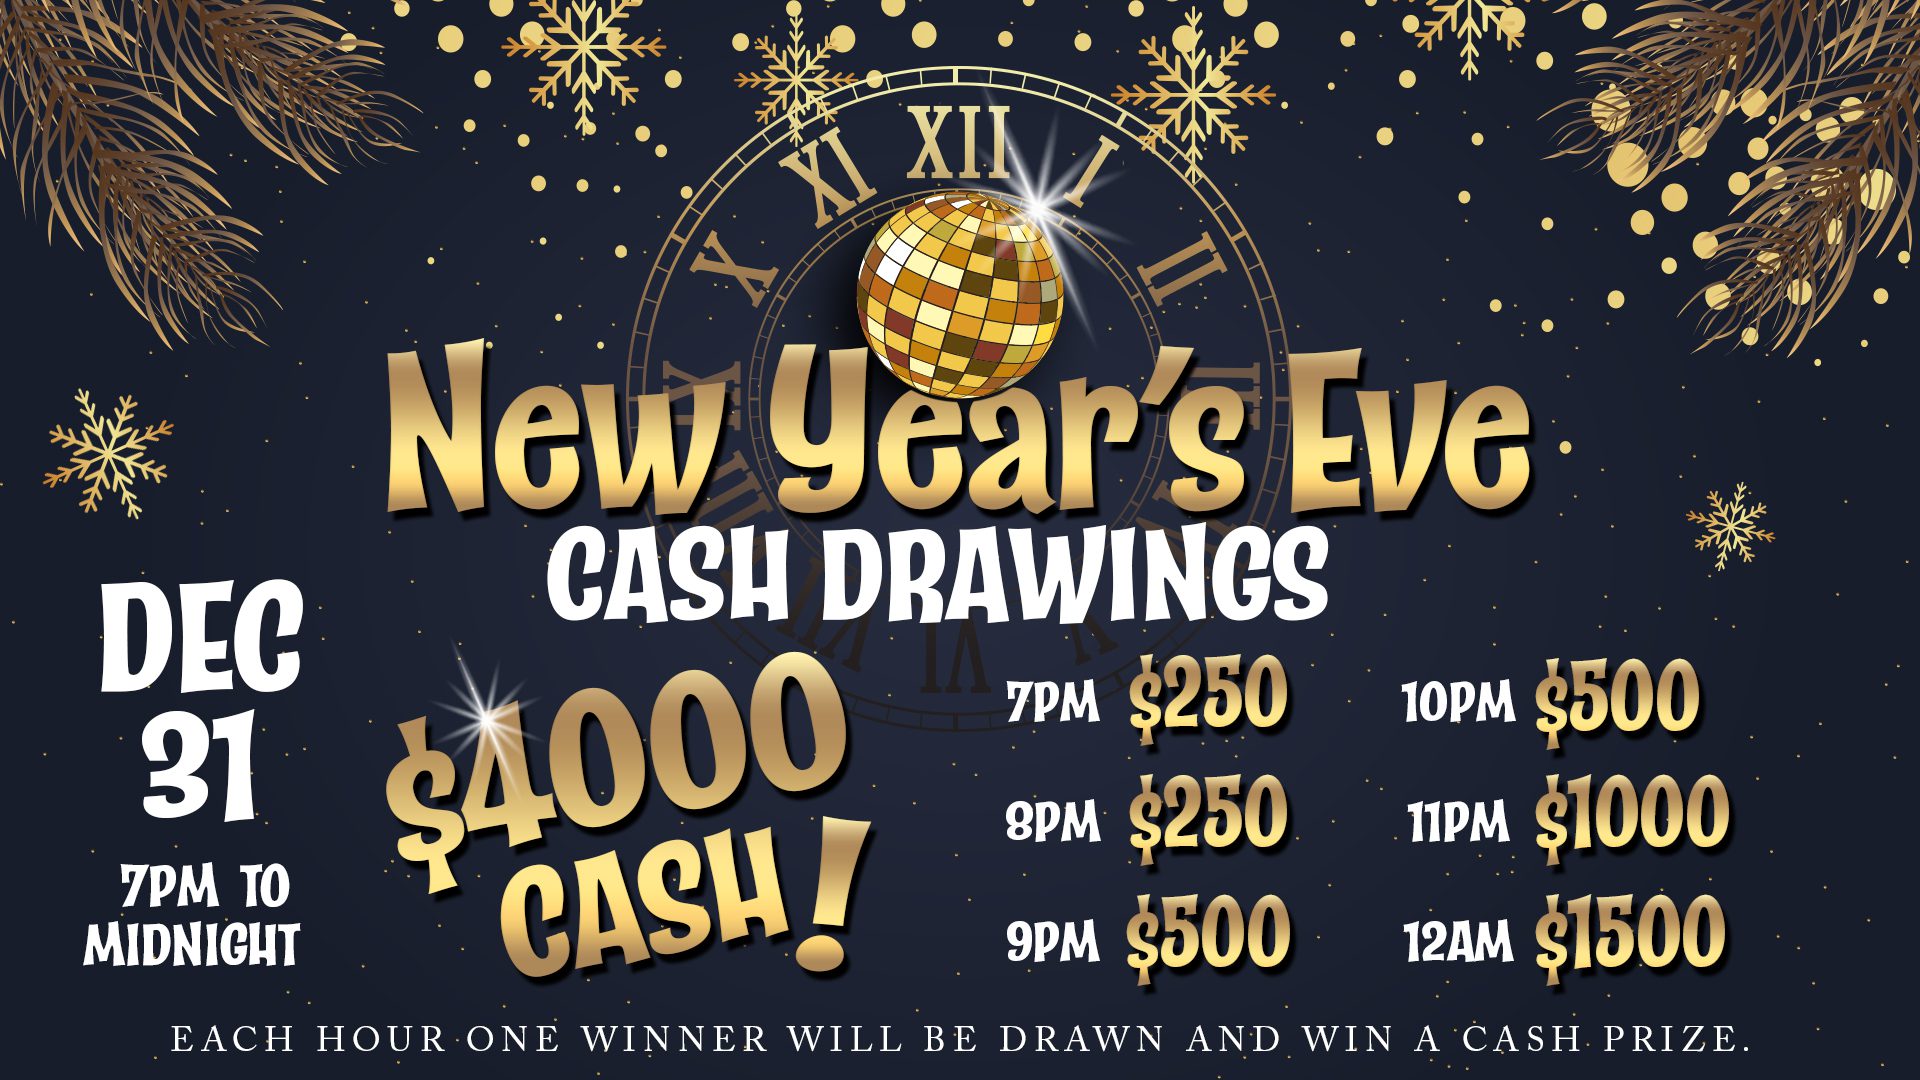 A new year 's eve cash drawing is being held on the same day as the upcoming event.